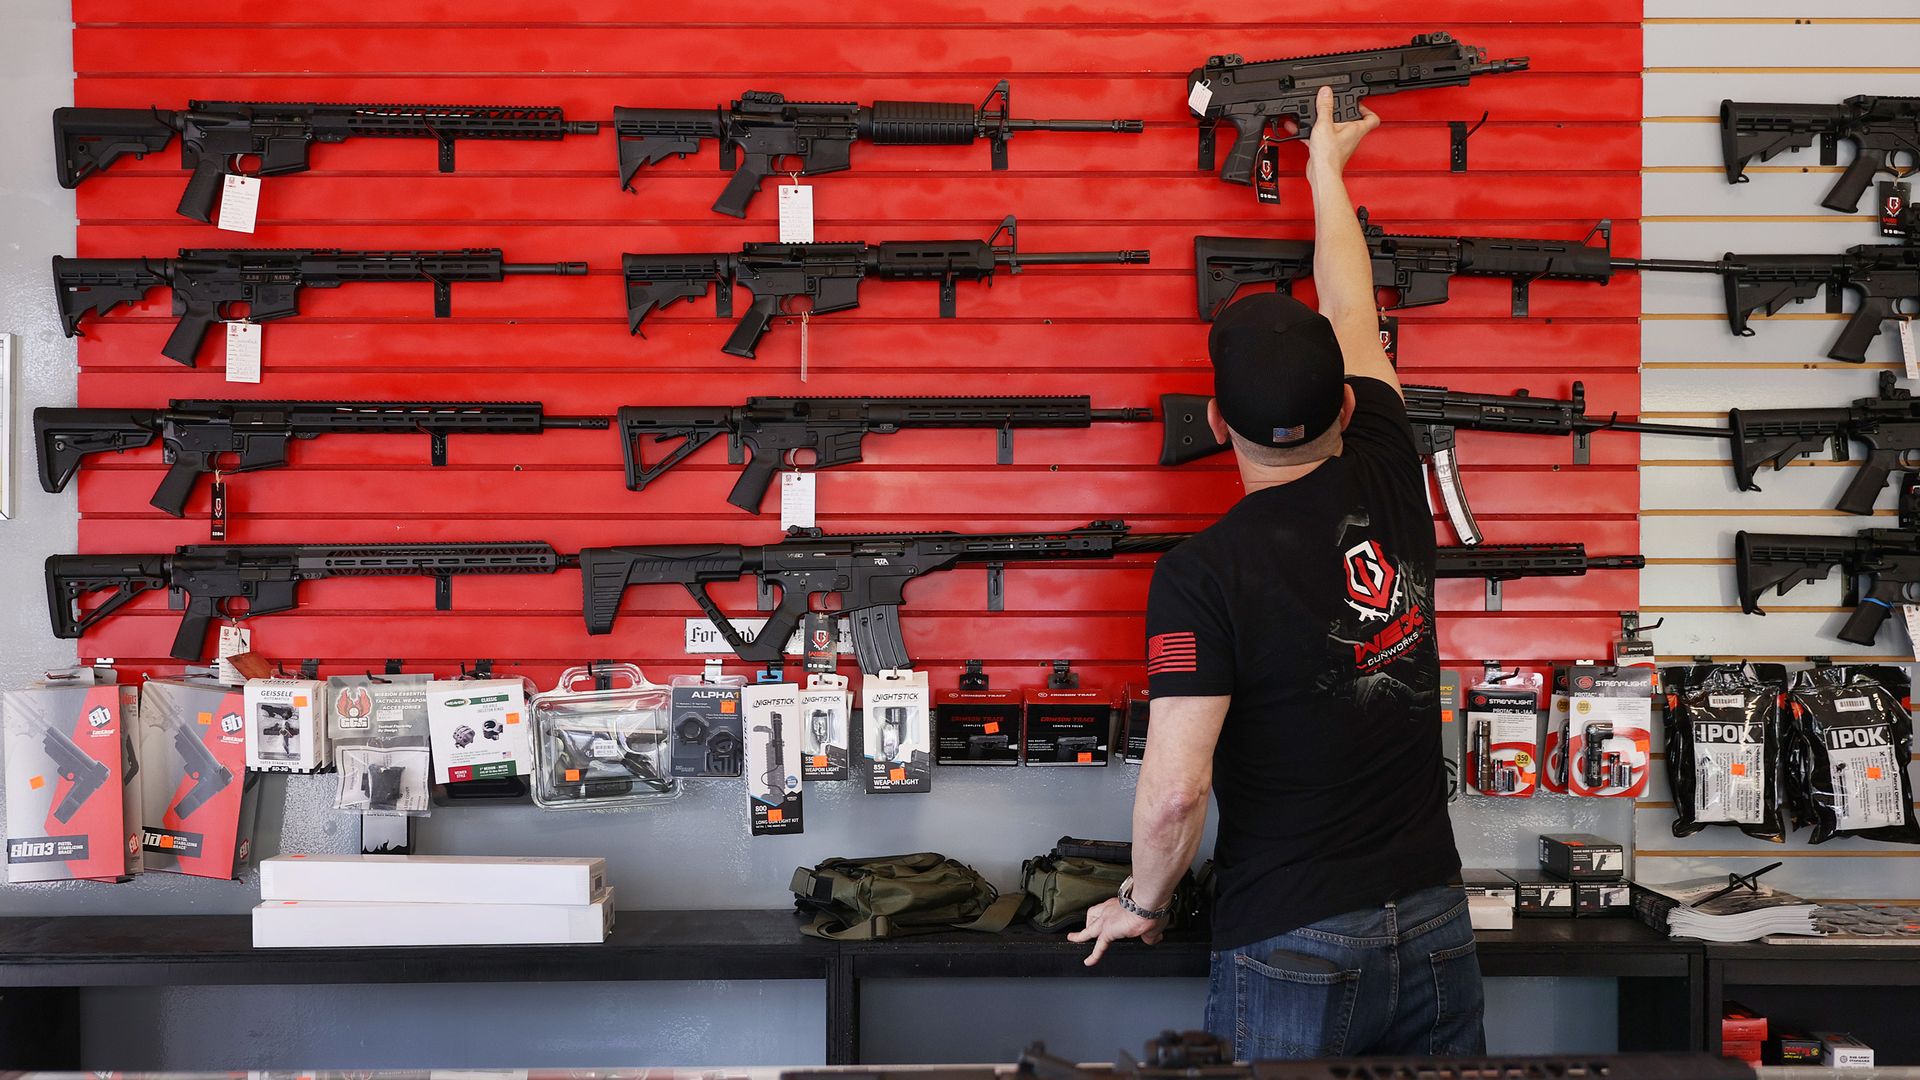 Photo of a person reaching up to take a gun off a rack of firearms